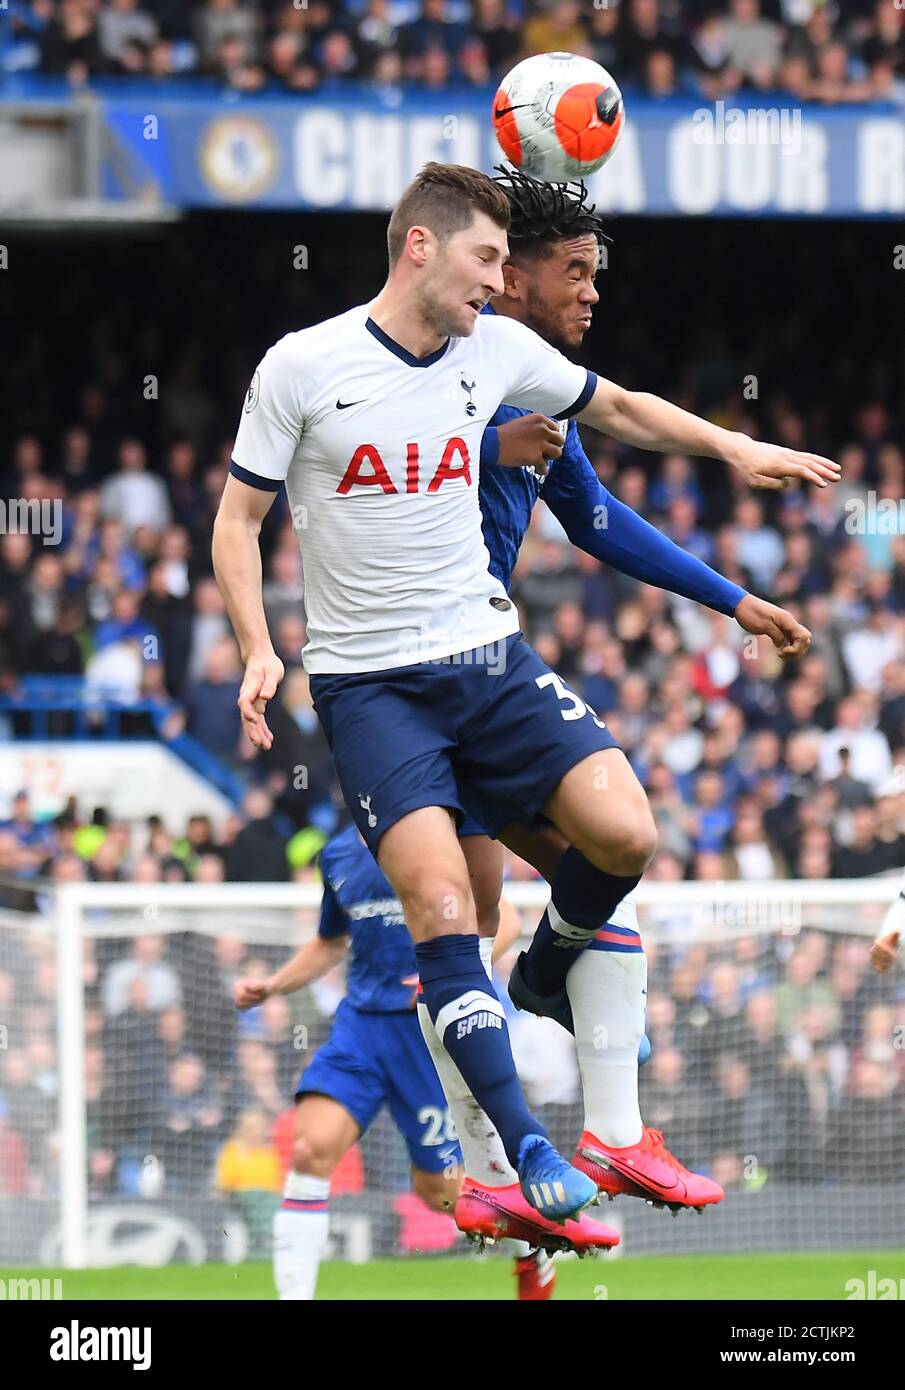 LONDON, ENGLAND - FEBRUARY 22, 2020: Ben Davies of Tottenham and Reece James of Chelsea pictured during the 2019/20 Premier League game between Chelsea FC and Tottenham Hotspur FC at Stamford Bridge. Stock Photo